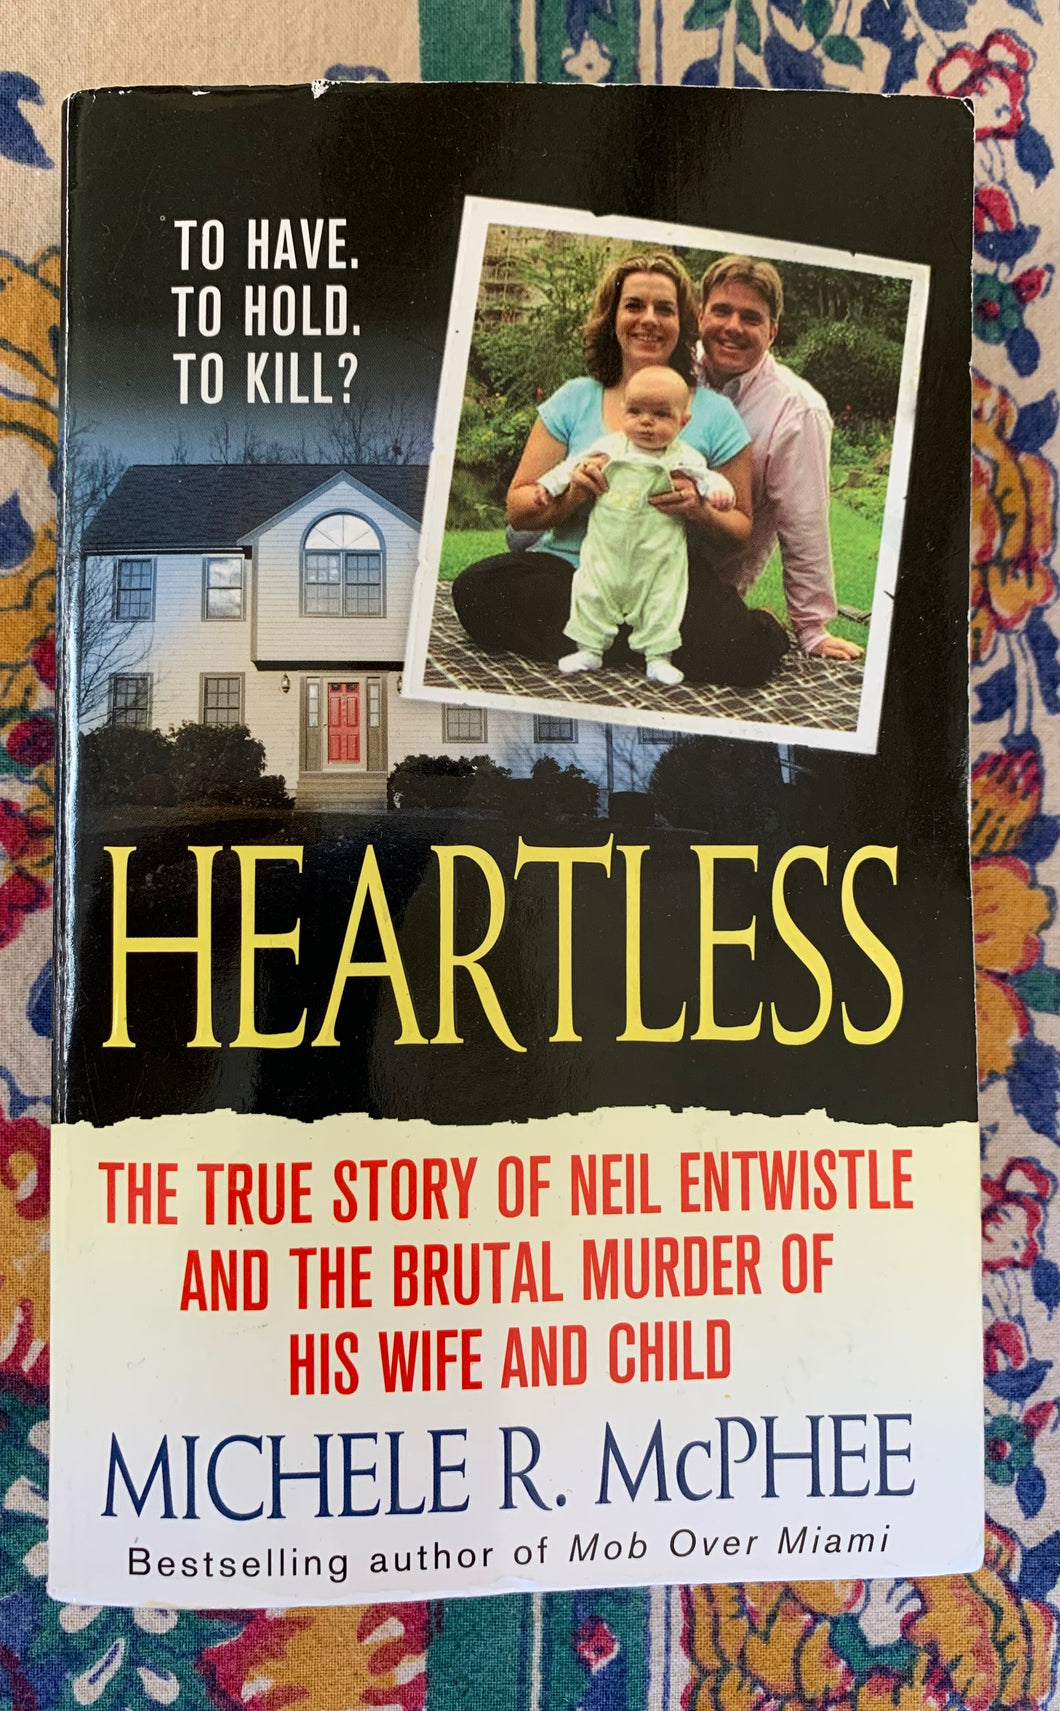 Heartless: The True Story of Neil Entwistle and the Brutal Murder of His Wife and Child